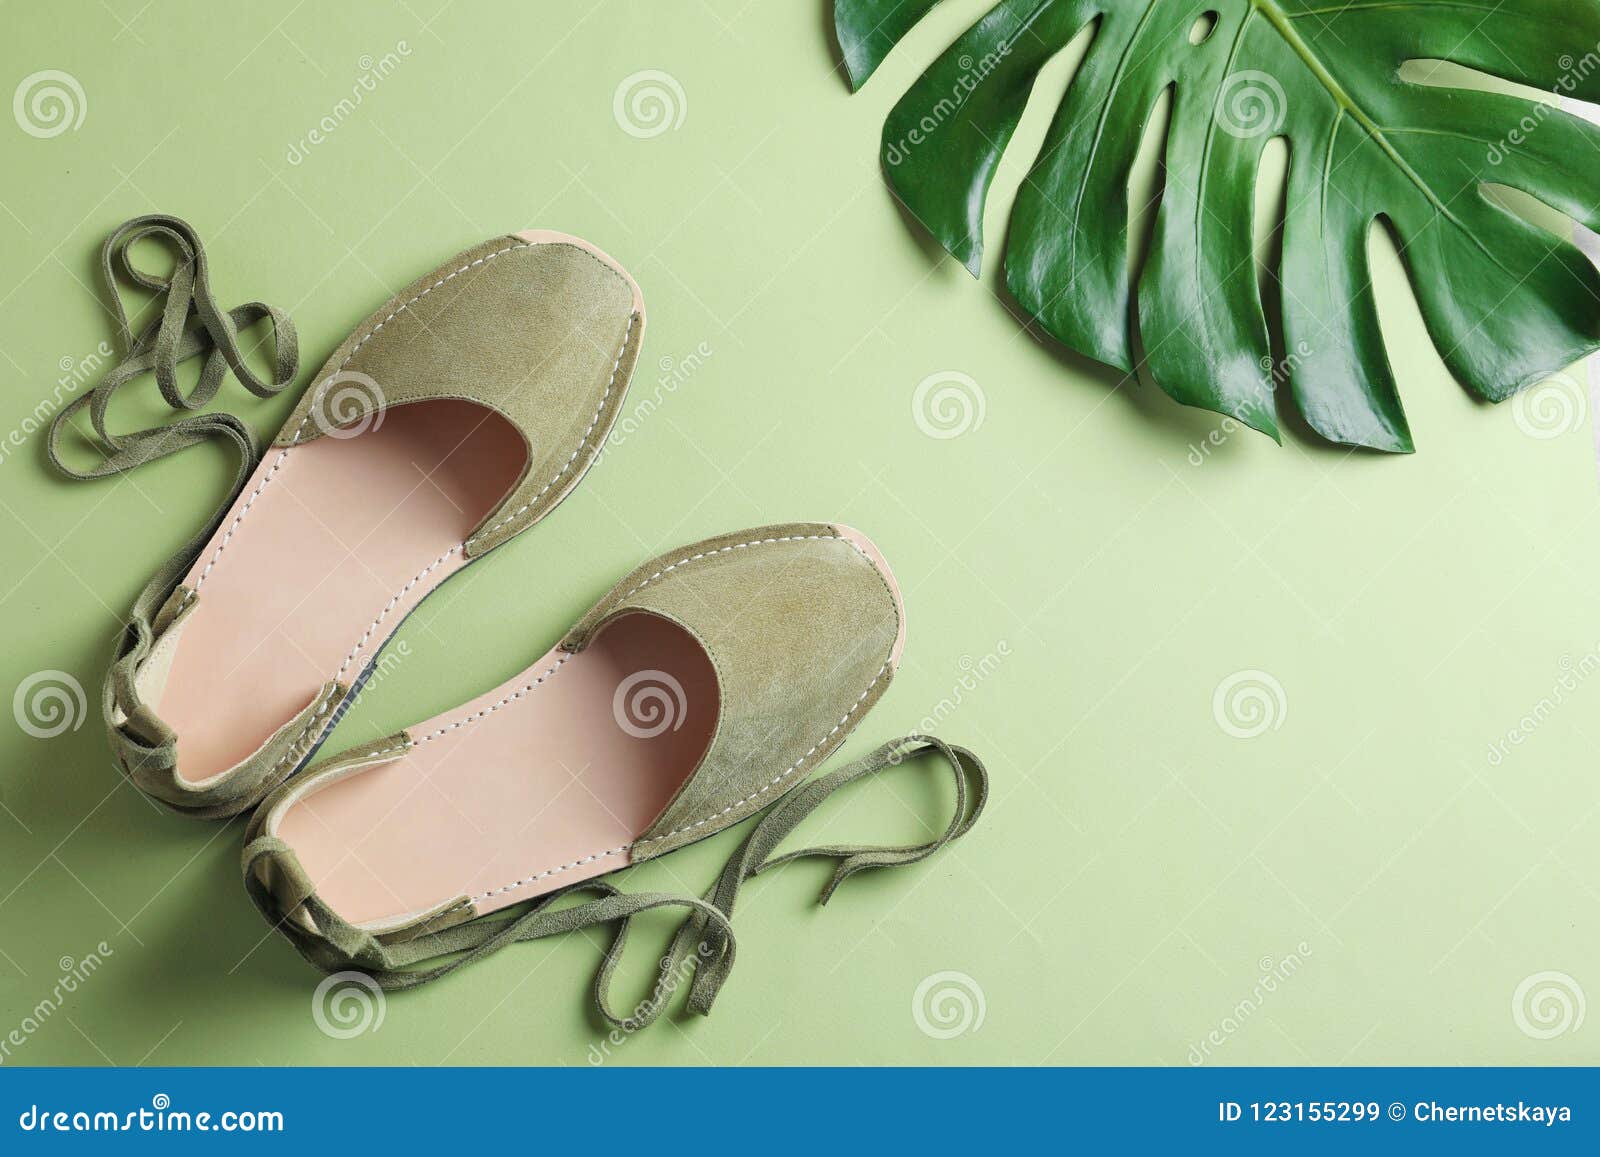 Pair of Trendy Women`s Shoes and Tropical Leaf Stock Image - Image of ...